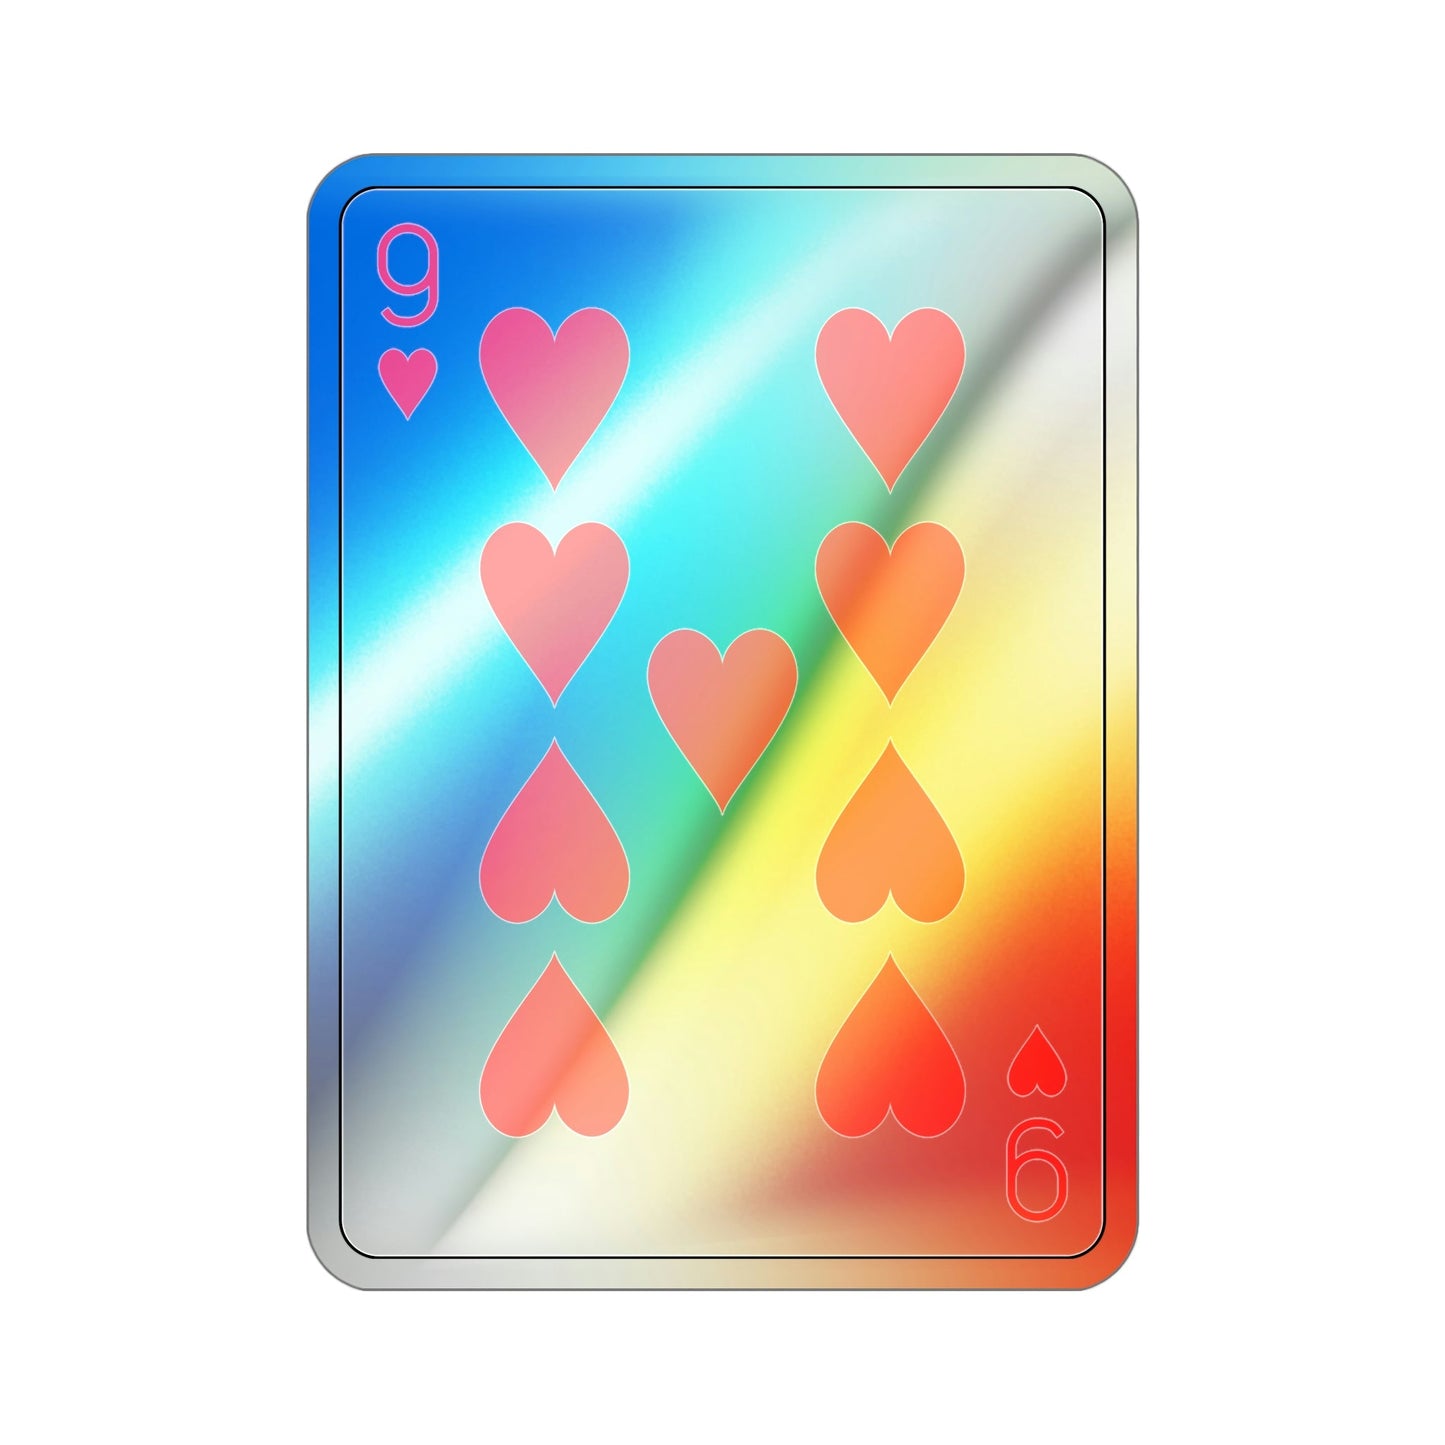 9 of Hearts Playing Card Holographic STICKER Die-Cut Vinyl Decal-5 Inch-The Sticker Space